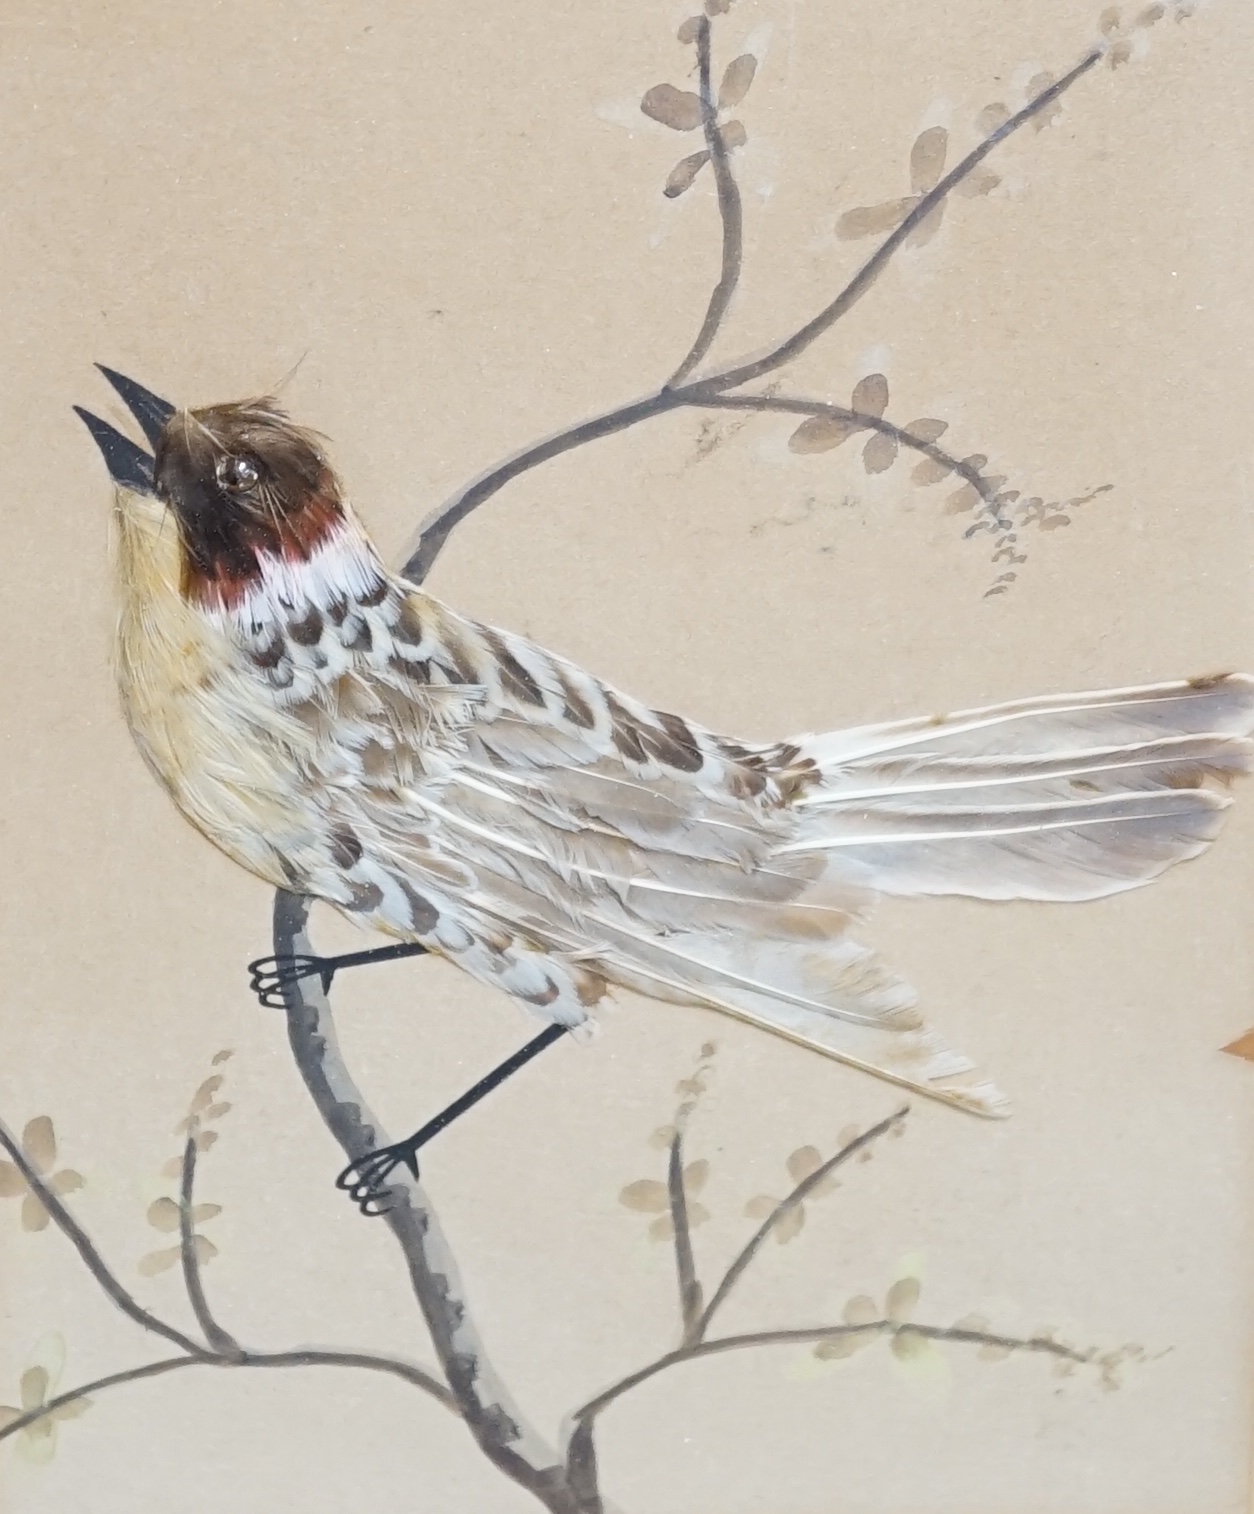 Late 19th / early 20th century, watercolour and feather picture, Bird on a branch, 19.5 x 14cm. Condition - poor to fair discolouration and tears to the paper